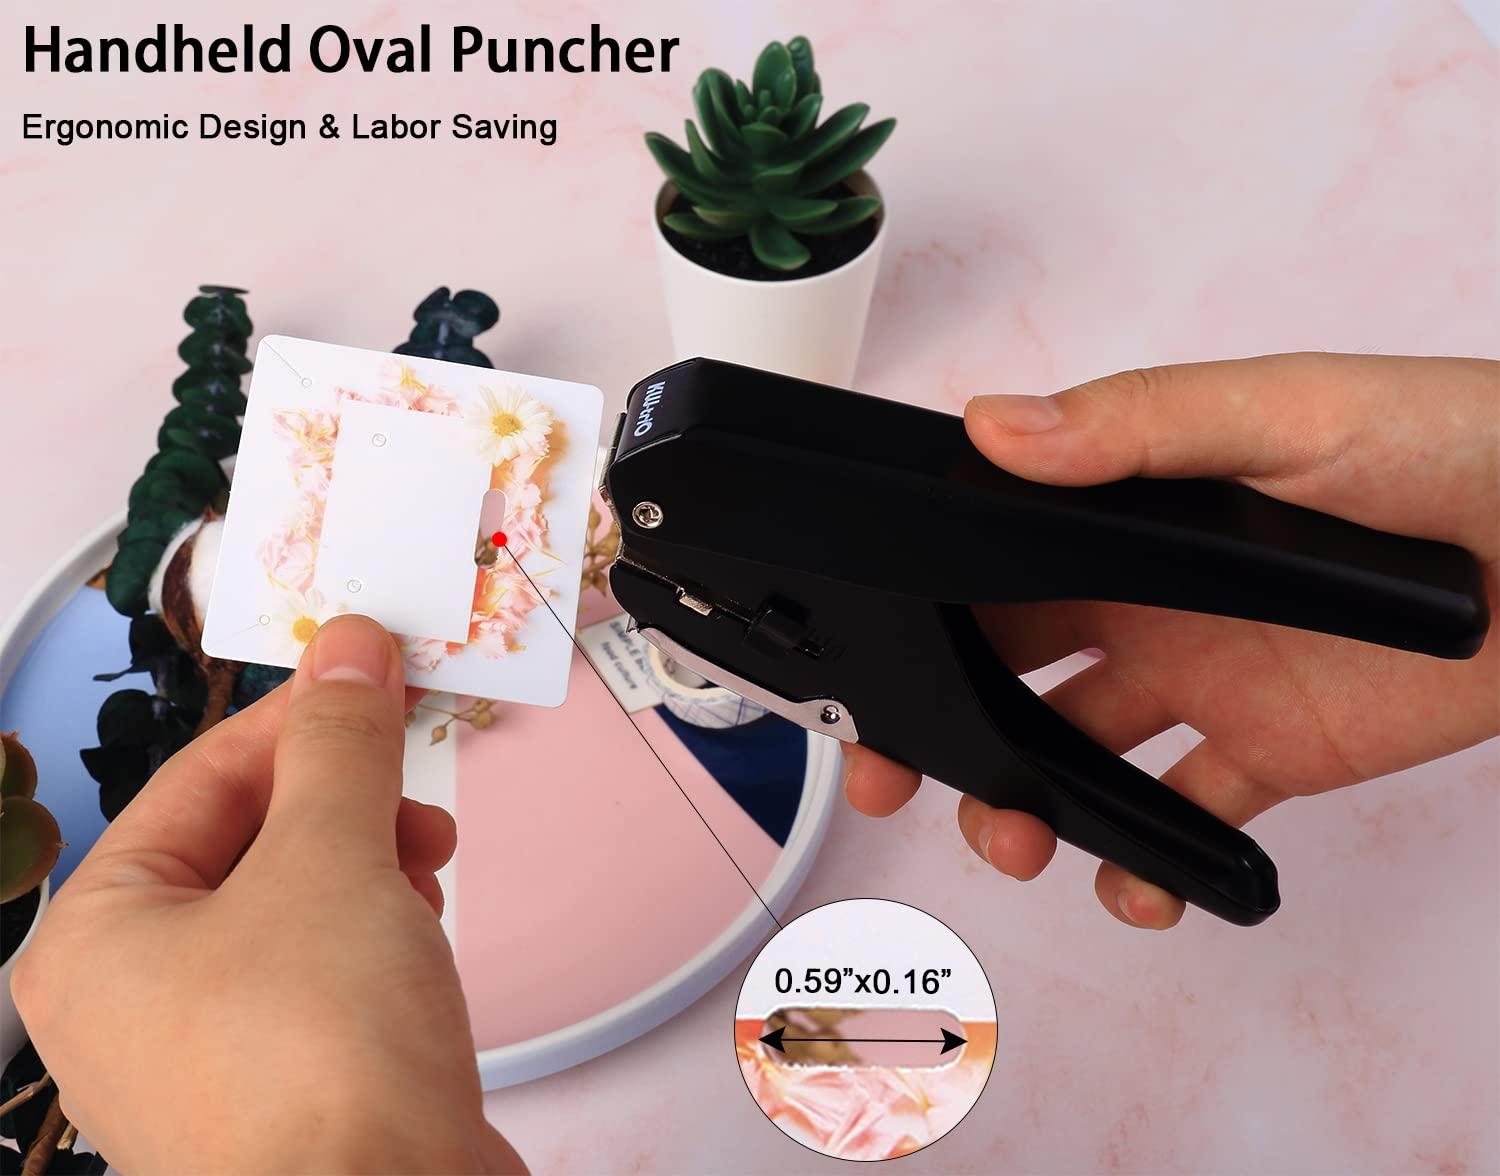 Heavy-Duty Slot Punch Handheld Badge Hole Puncher All Metal ID Card Puncher  Slotting Punch Tool for PVC ID Card Luggage tag Name Tag and Badge Holder